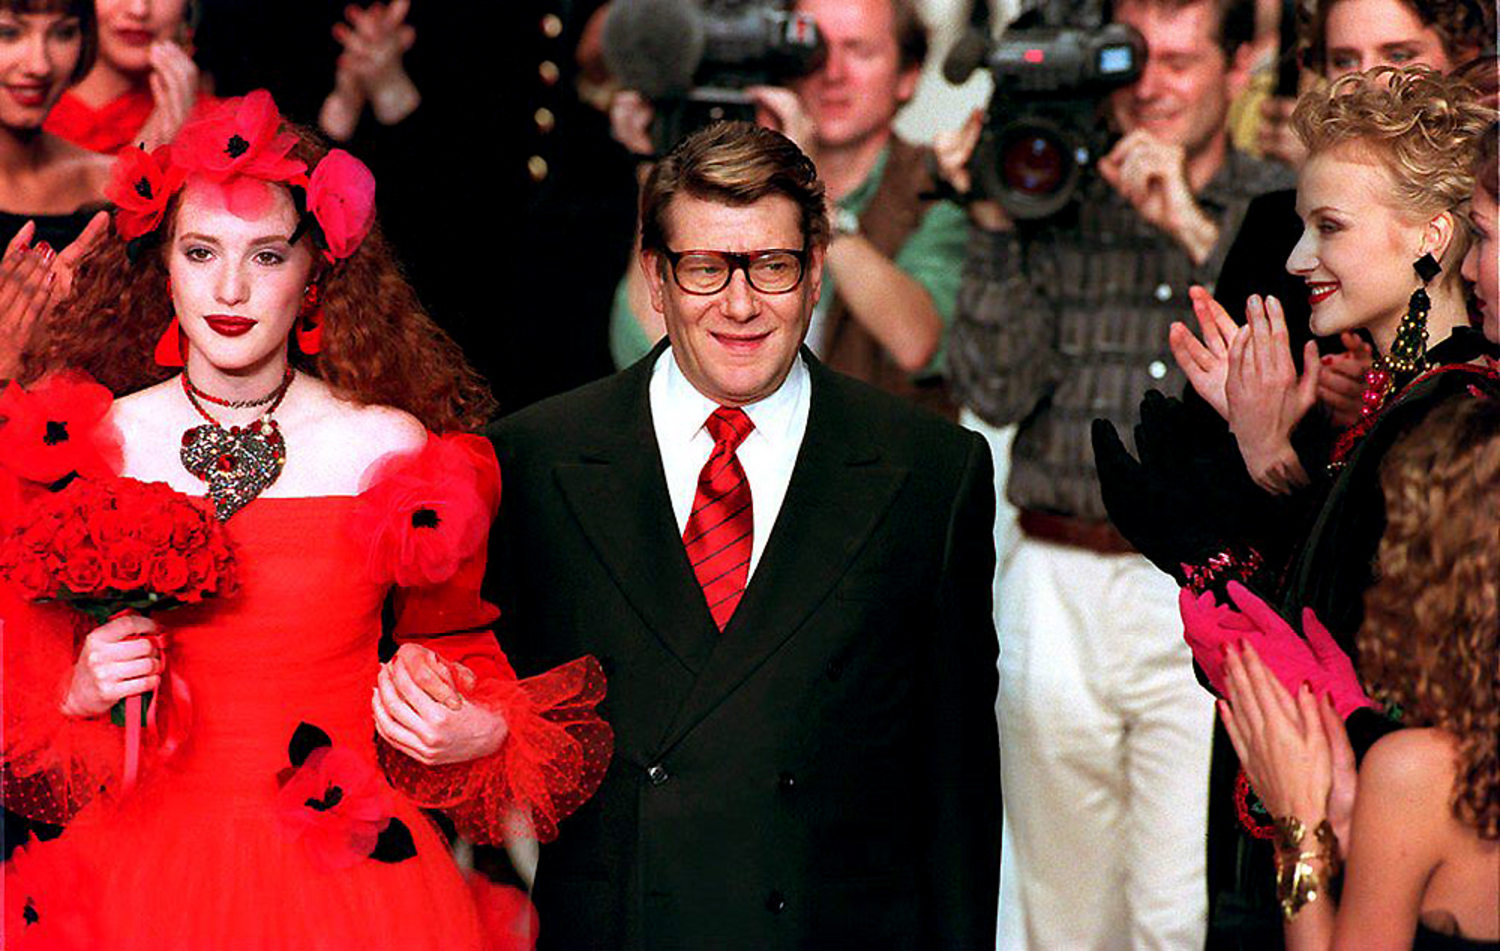 Yves Saint Laurent: the man who showed women how to dress